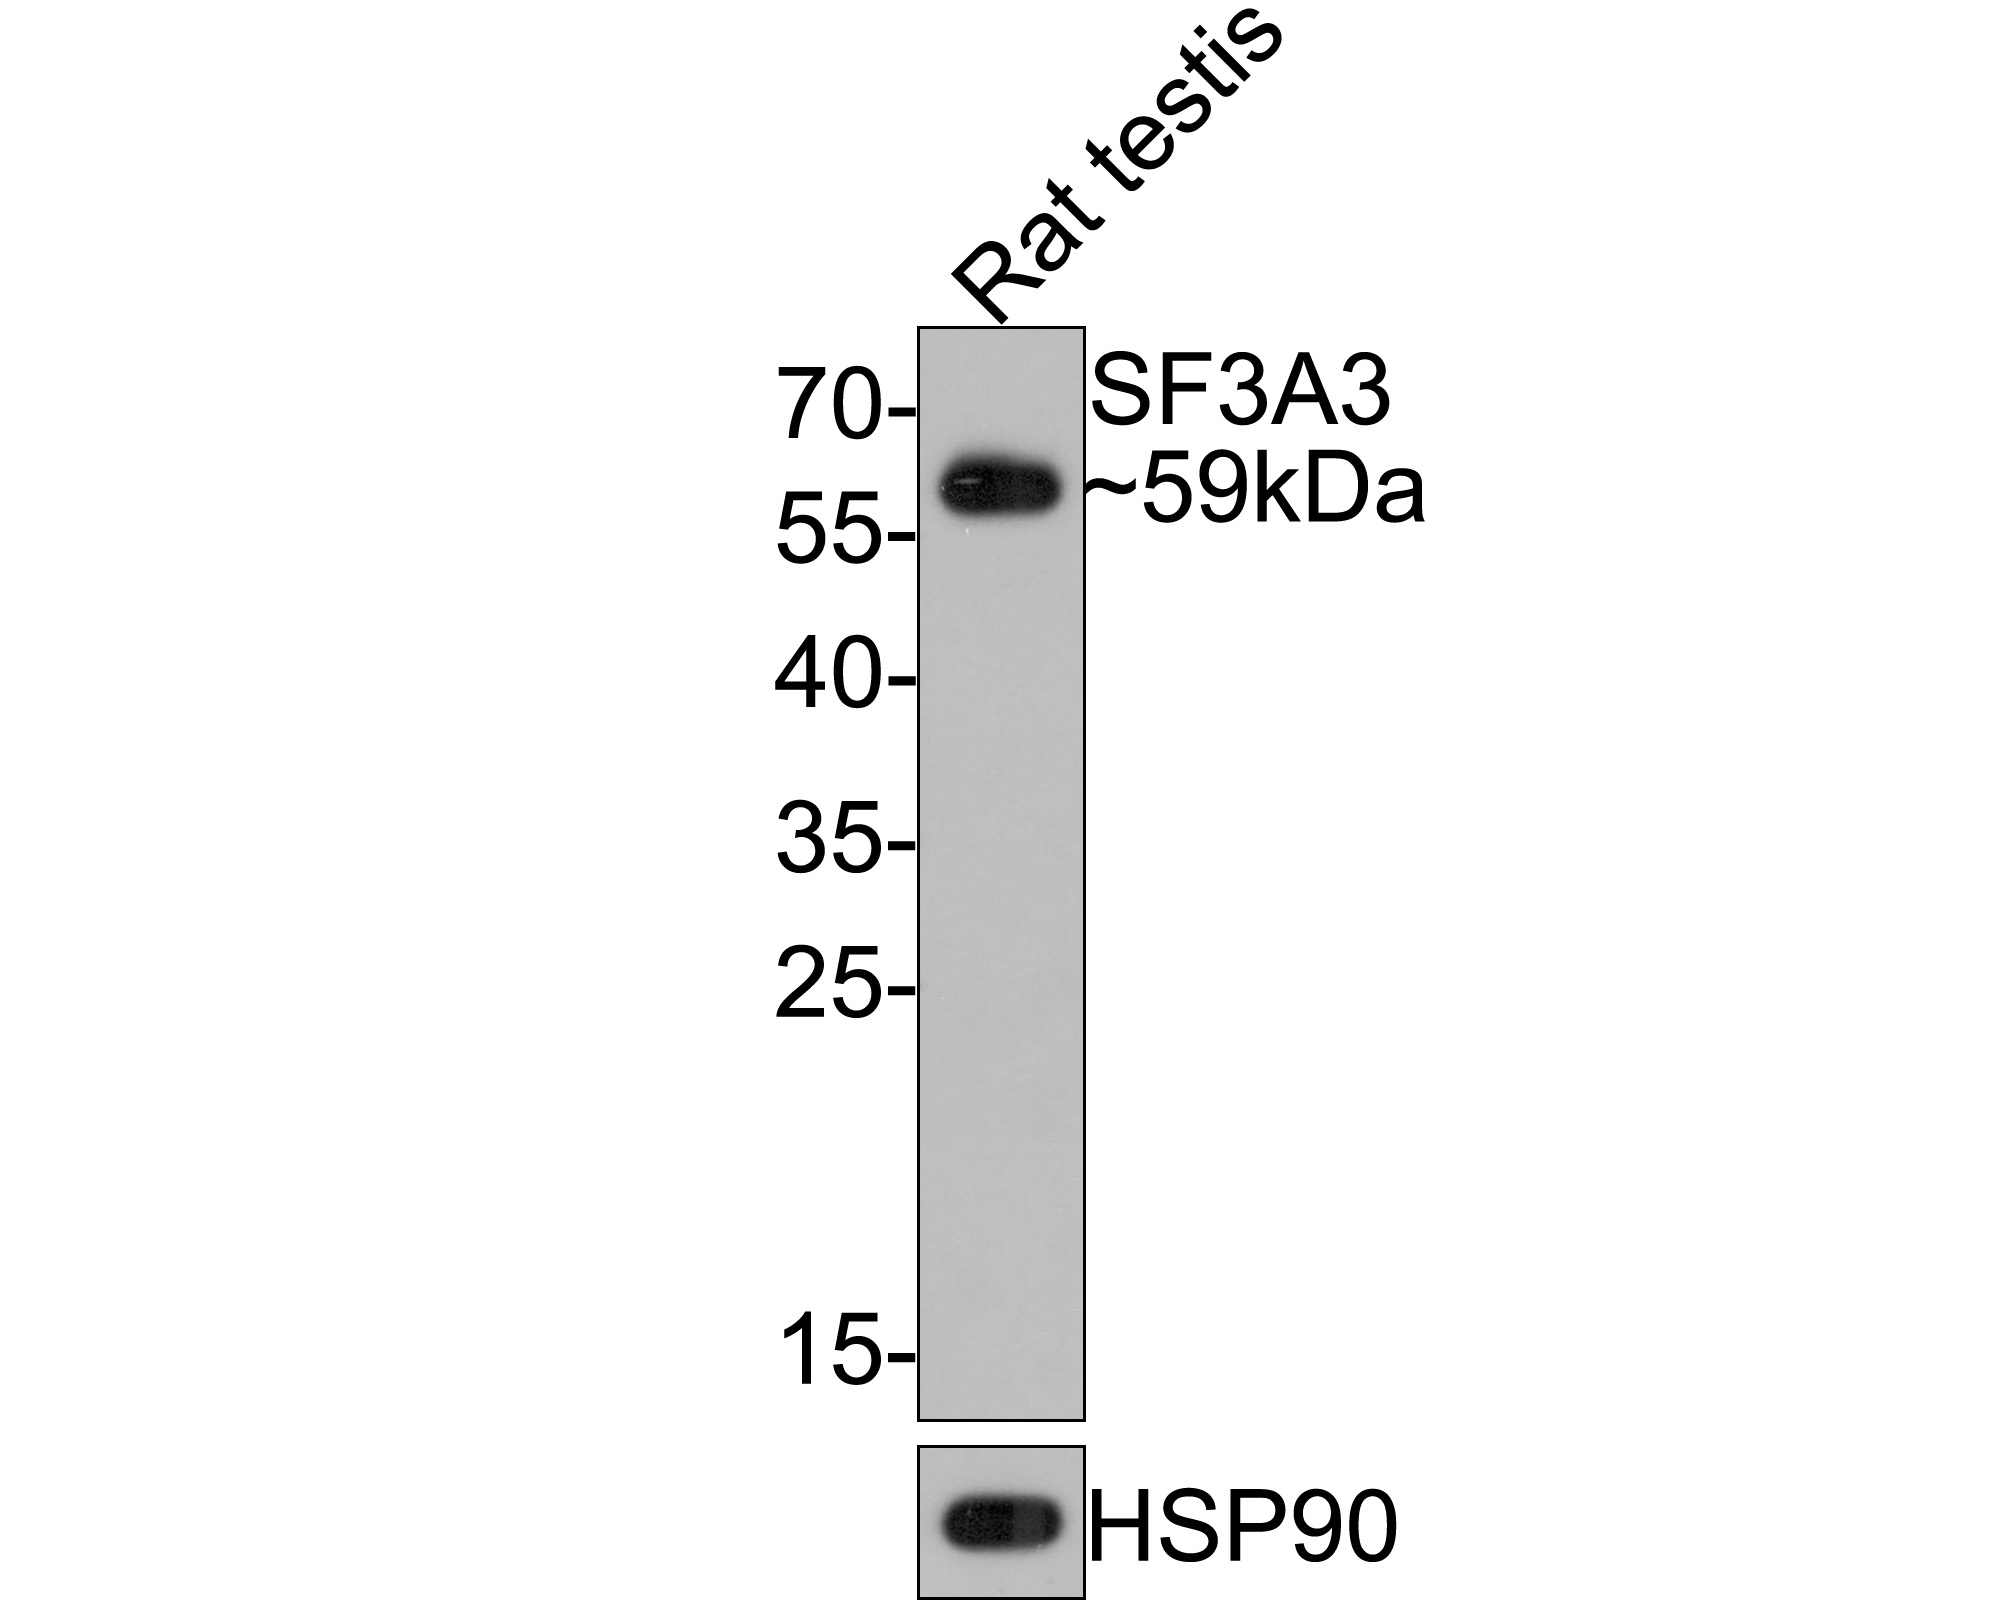 Western blot analysis of SF3A3 on rat testis tissue lysates with Rabbit anti-SF3A3 antibody (HA721114) at 1/500 dilution.<br />
<br />
Lysates/proteins at 20 µg/Lane.<br />
<br />
Predicted band size: 59 kDa<br />
Observed band size: 59 kDa<br />
<br />
Exposure time: 30 seconds;<br />
<br />
12% SDS-PAGE gel.<br />
<br />
Proteins were transferred to a PVDF membrane and blocked with 5% NFDM/TBST for 1 hour at room temperature. The primary antibody (HA721114) at 1/500 dilution was used in 5% NFDM/TBST at room temperature for 2 hours. Goat Anti-Rabbit IgG - HRP Secondary Antibody (HA1001) at 1:300,000 dilution was used for 1 hour at room temperature.